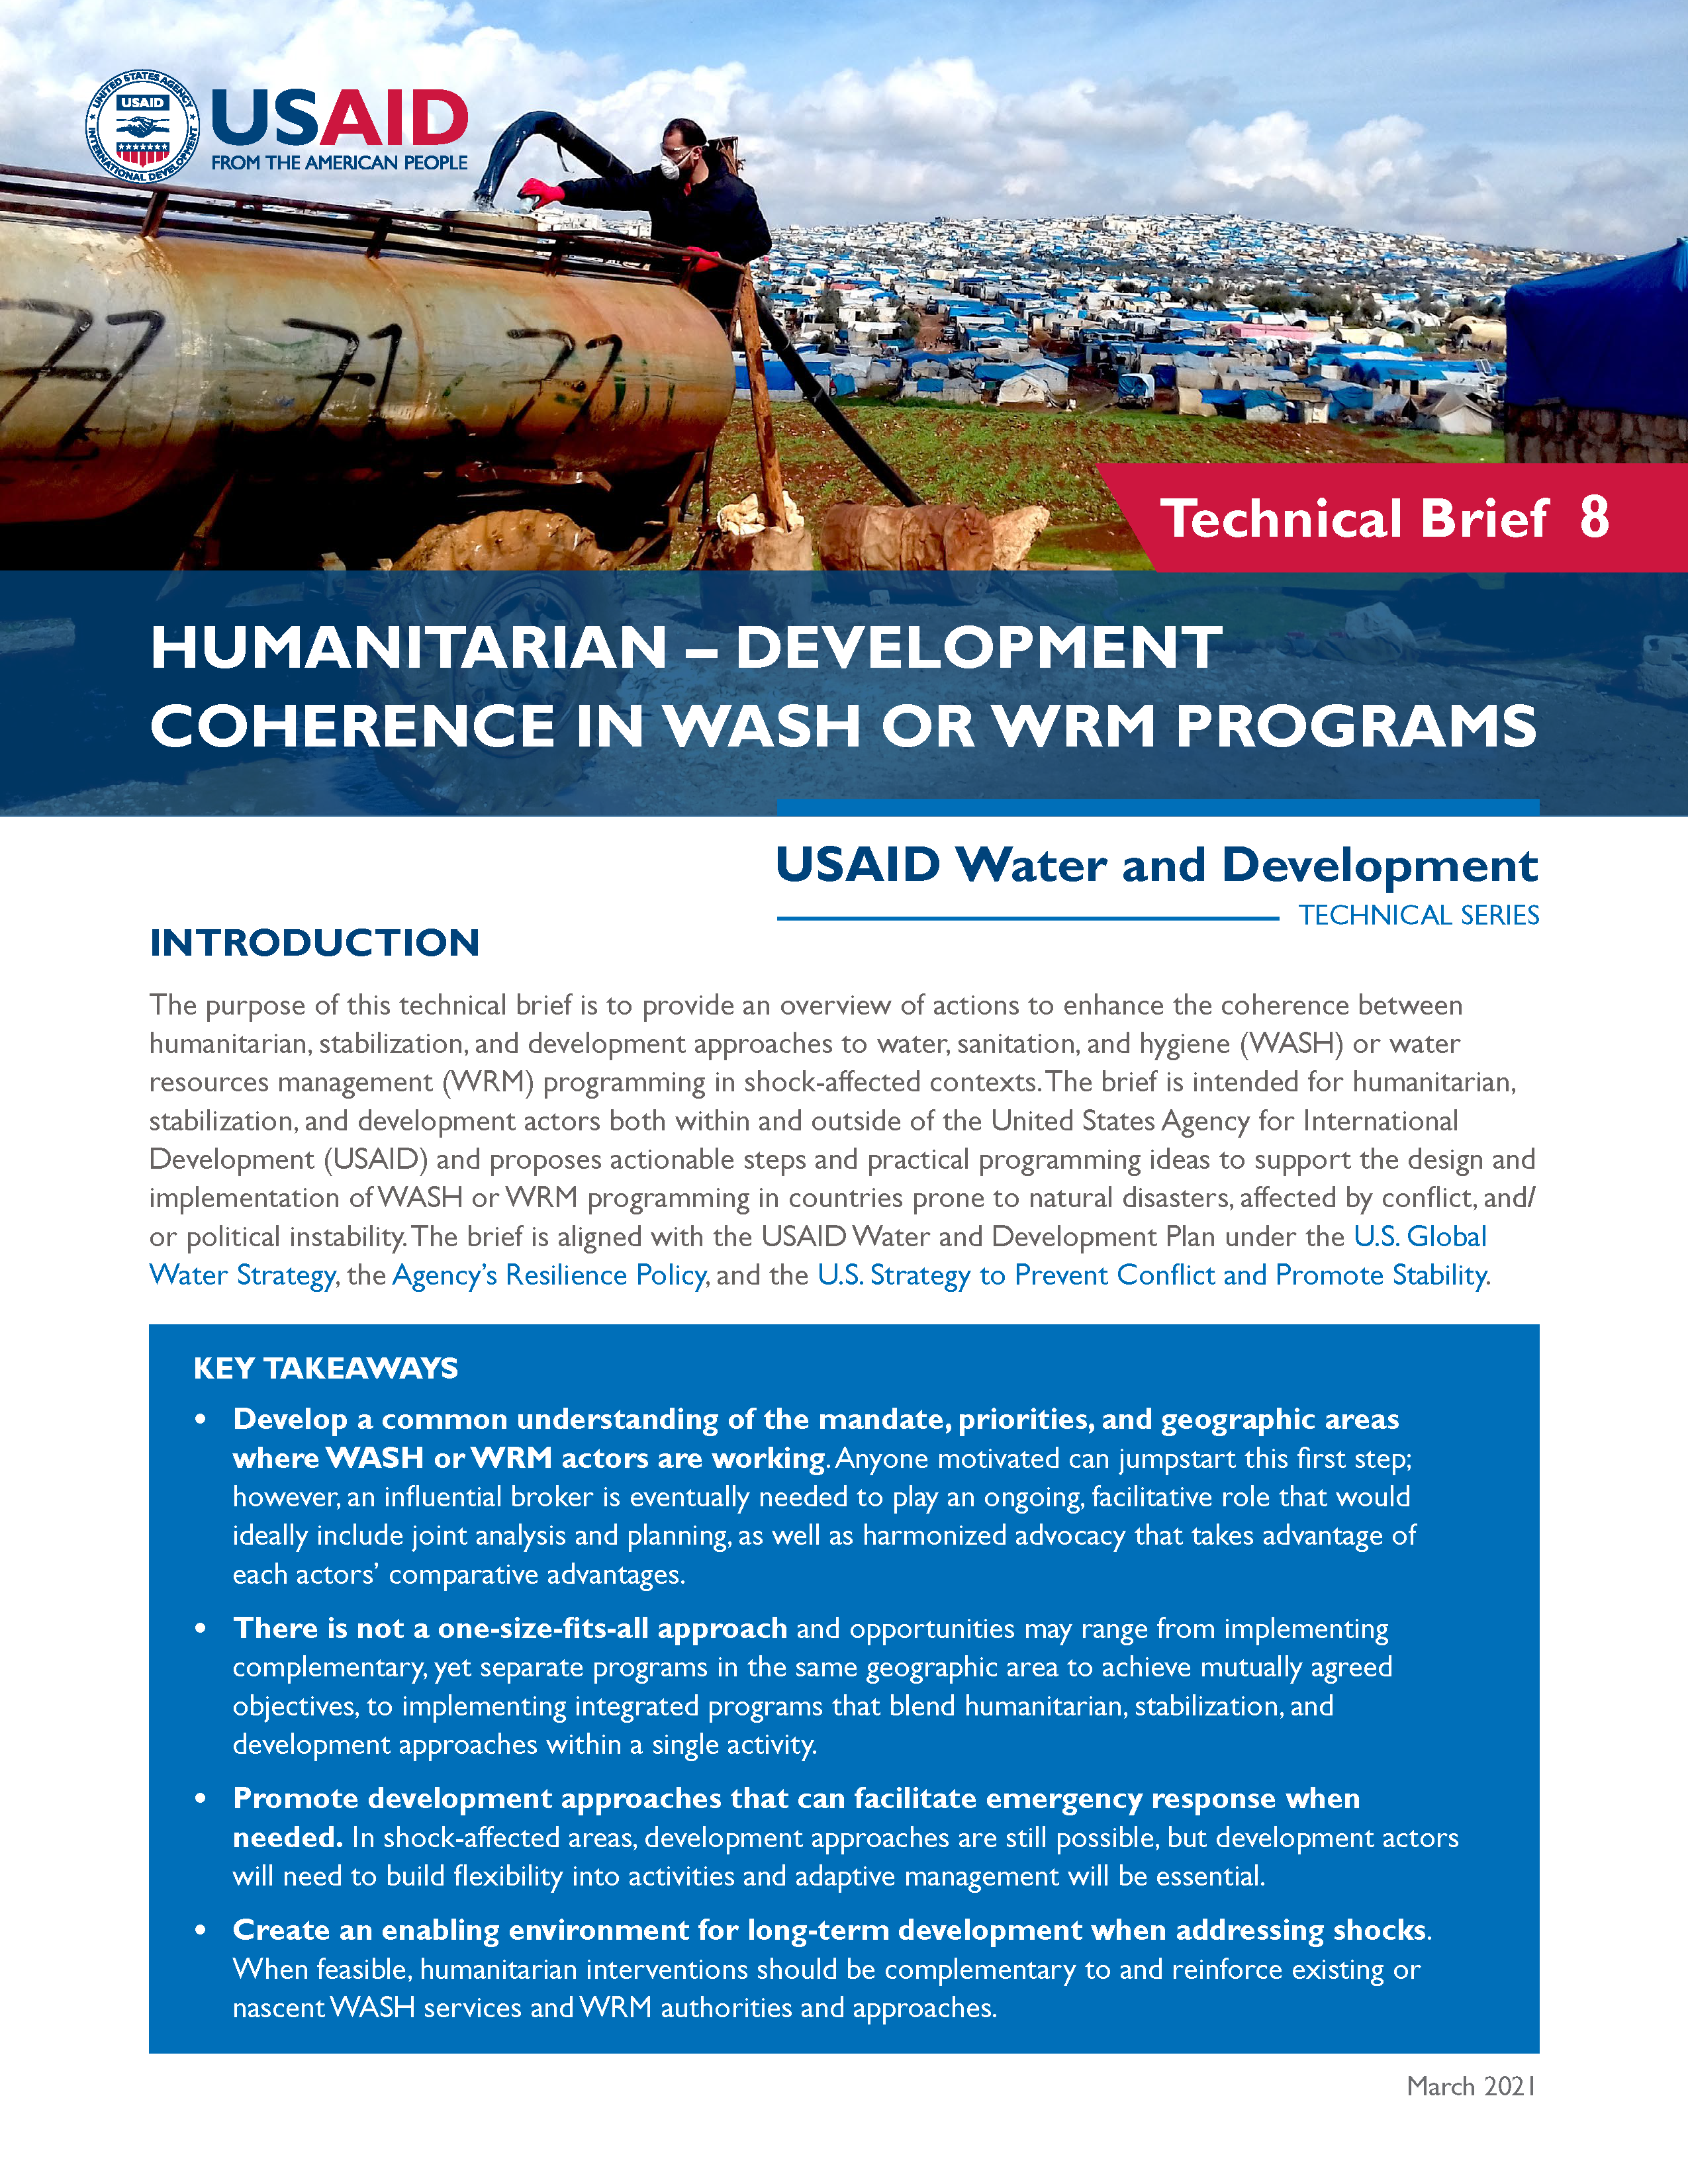 Cover page for Humanitarian-Development Coherence in WASH or WRM Programs